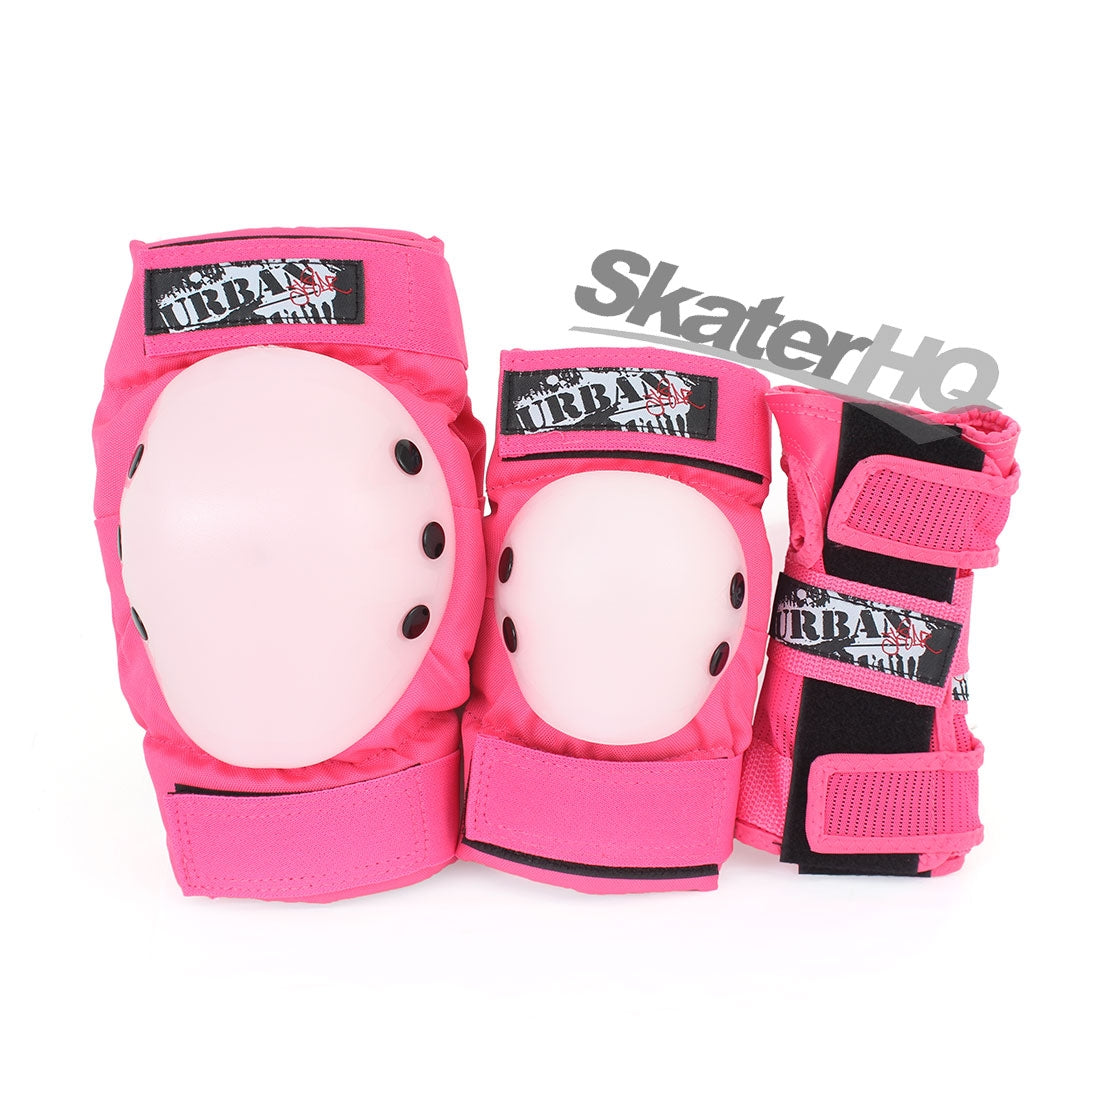 Urban Skater Tri Pack Pink - Large Protective Gear